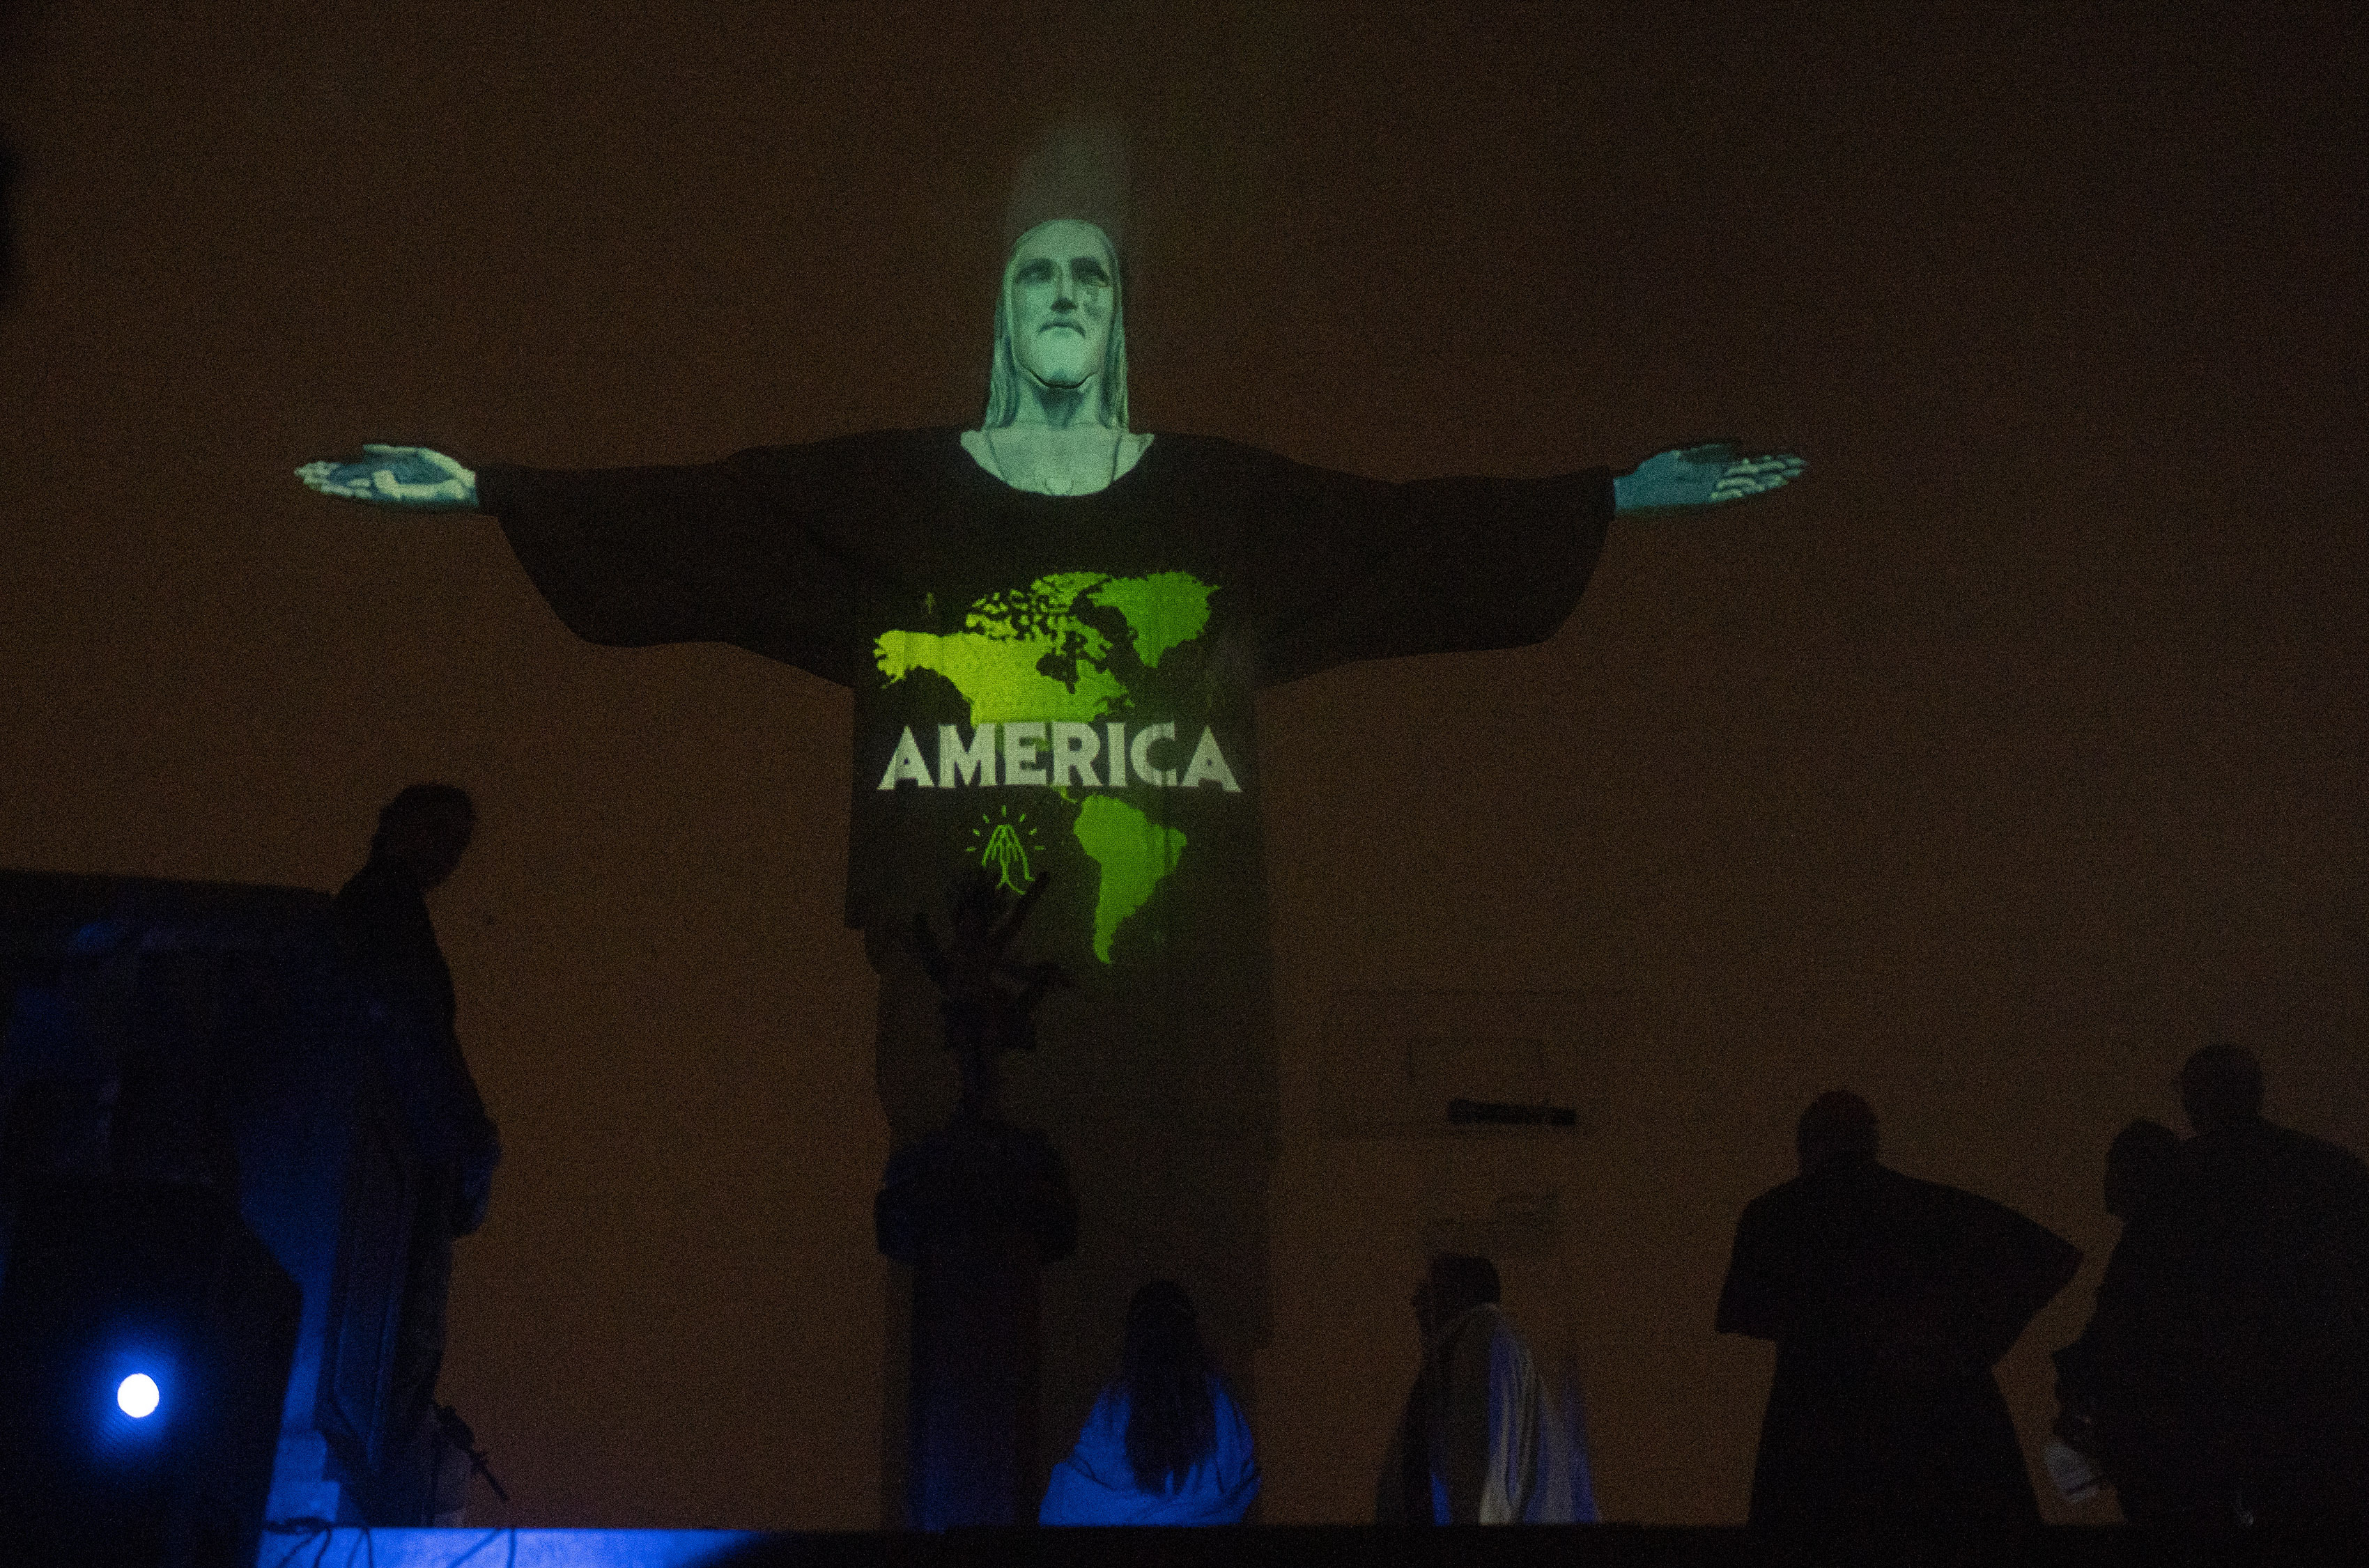 Rio's Christ the Redeemer statue is lit up with a map and the word America, in support of those afflicted by the new coronavirus in Rio de Janeiro, Brazil, Wednesday, March 18, 2020. For most people COVID-19 causes mild or moderate symptoms. For others, especially the elderly and people with existing health problems, it can cause many other serious illnesses, including pneumonia. (AP Photo/Silvia Izquierdo)